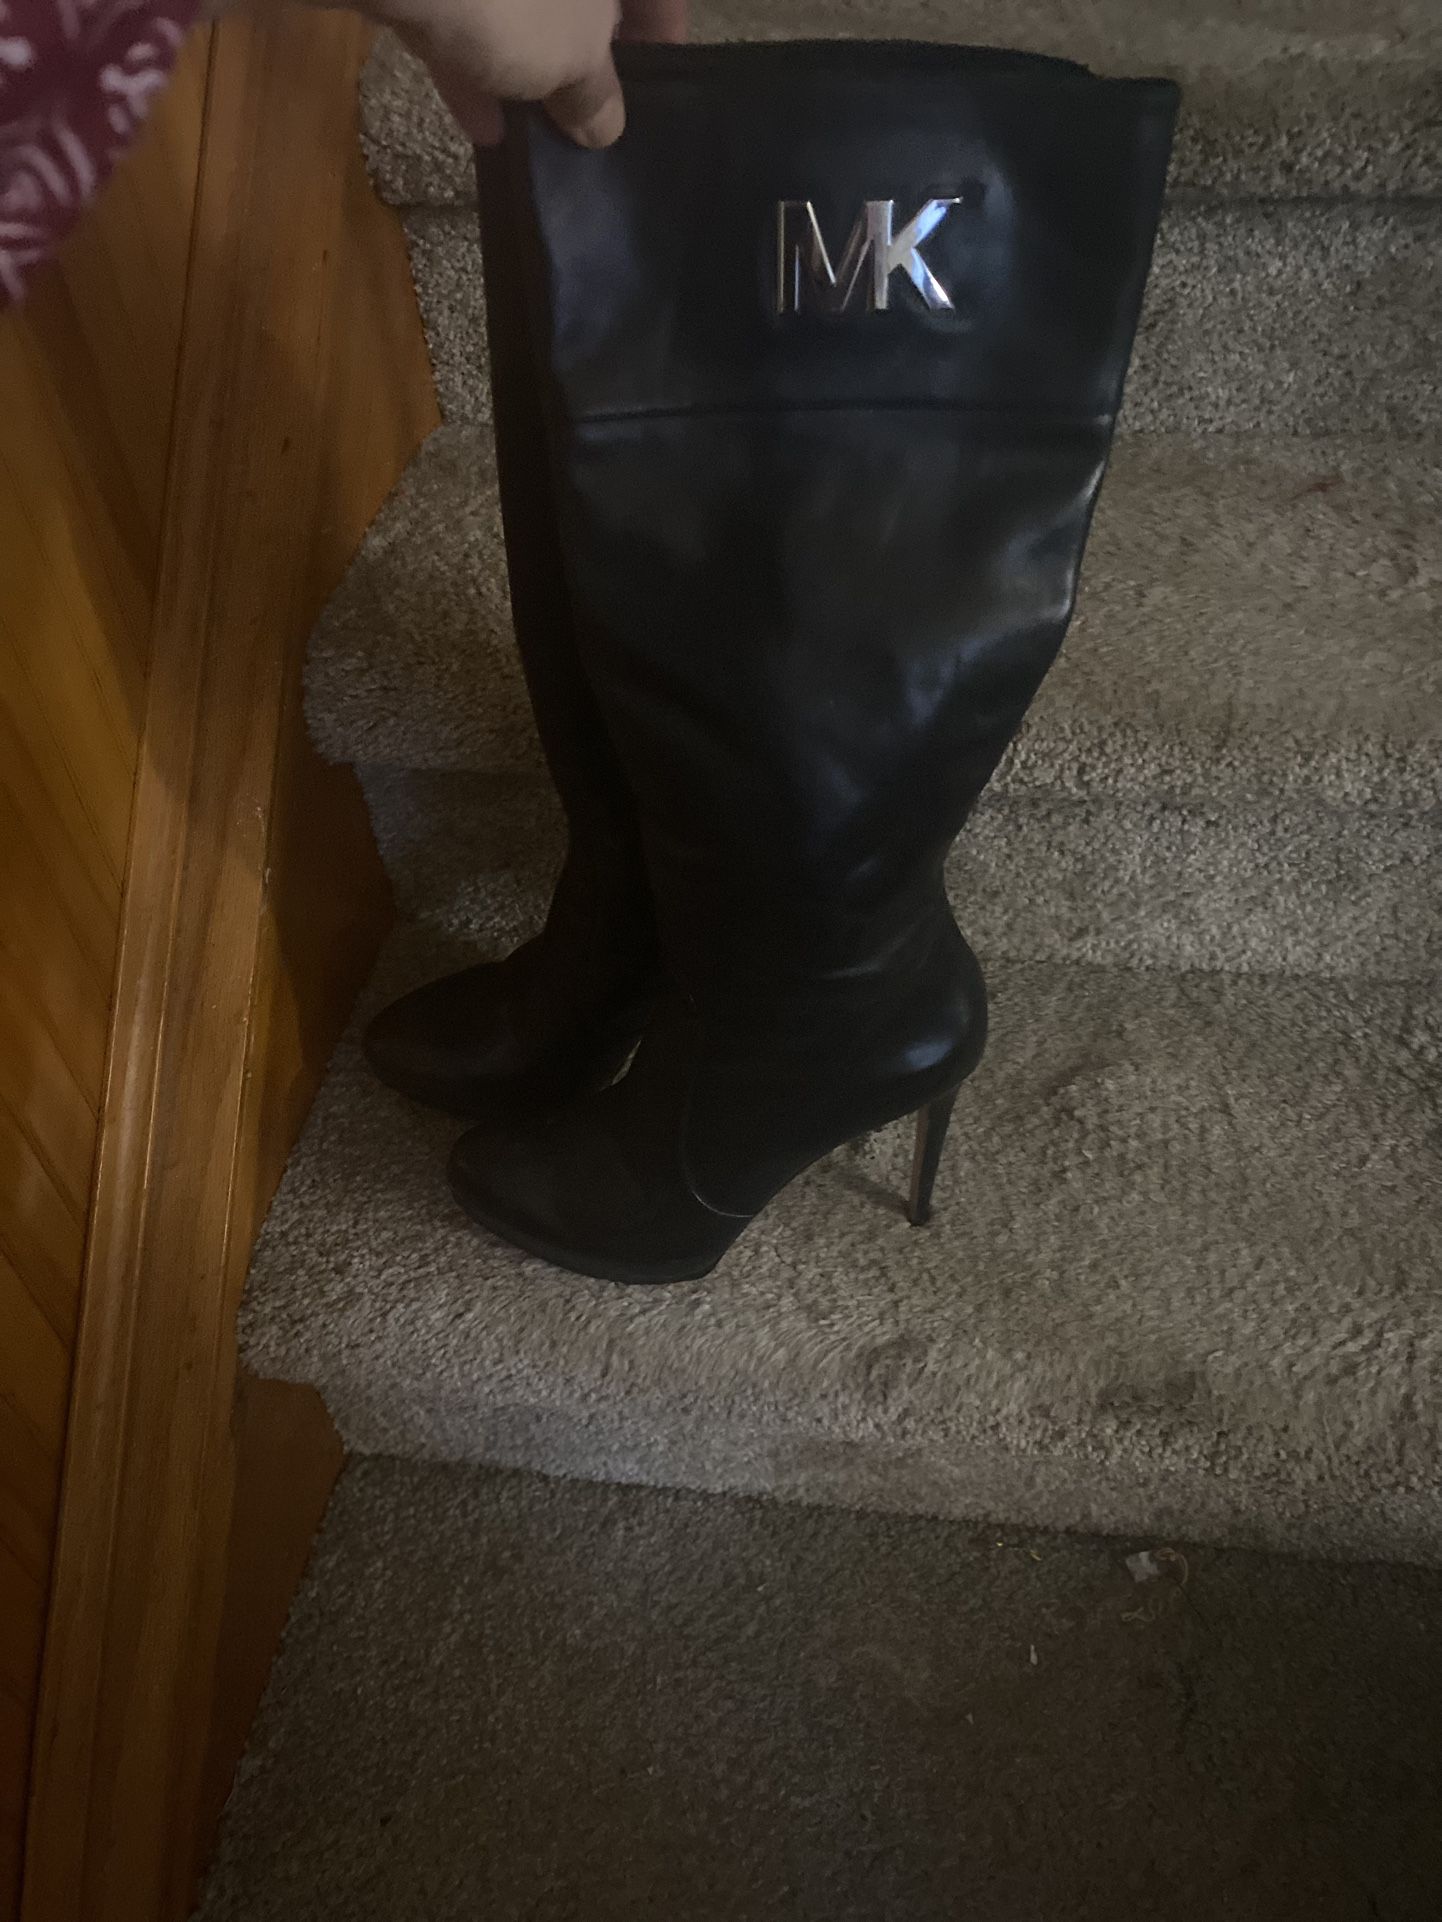 Michael Kors black leather knee high boots with silver hardware, side zippers, 5" heel, used, excellent condition